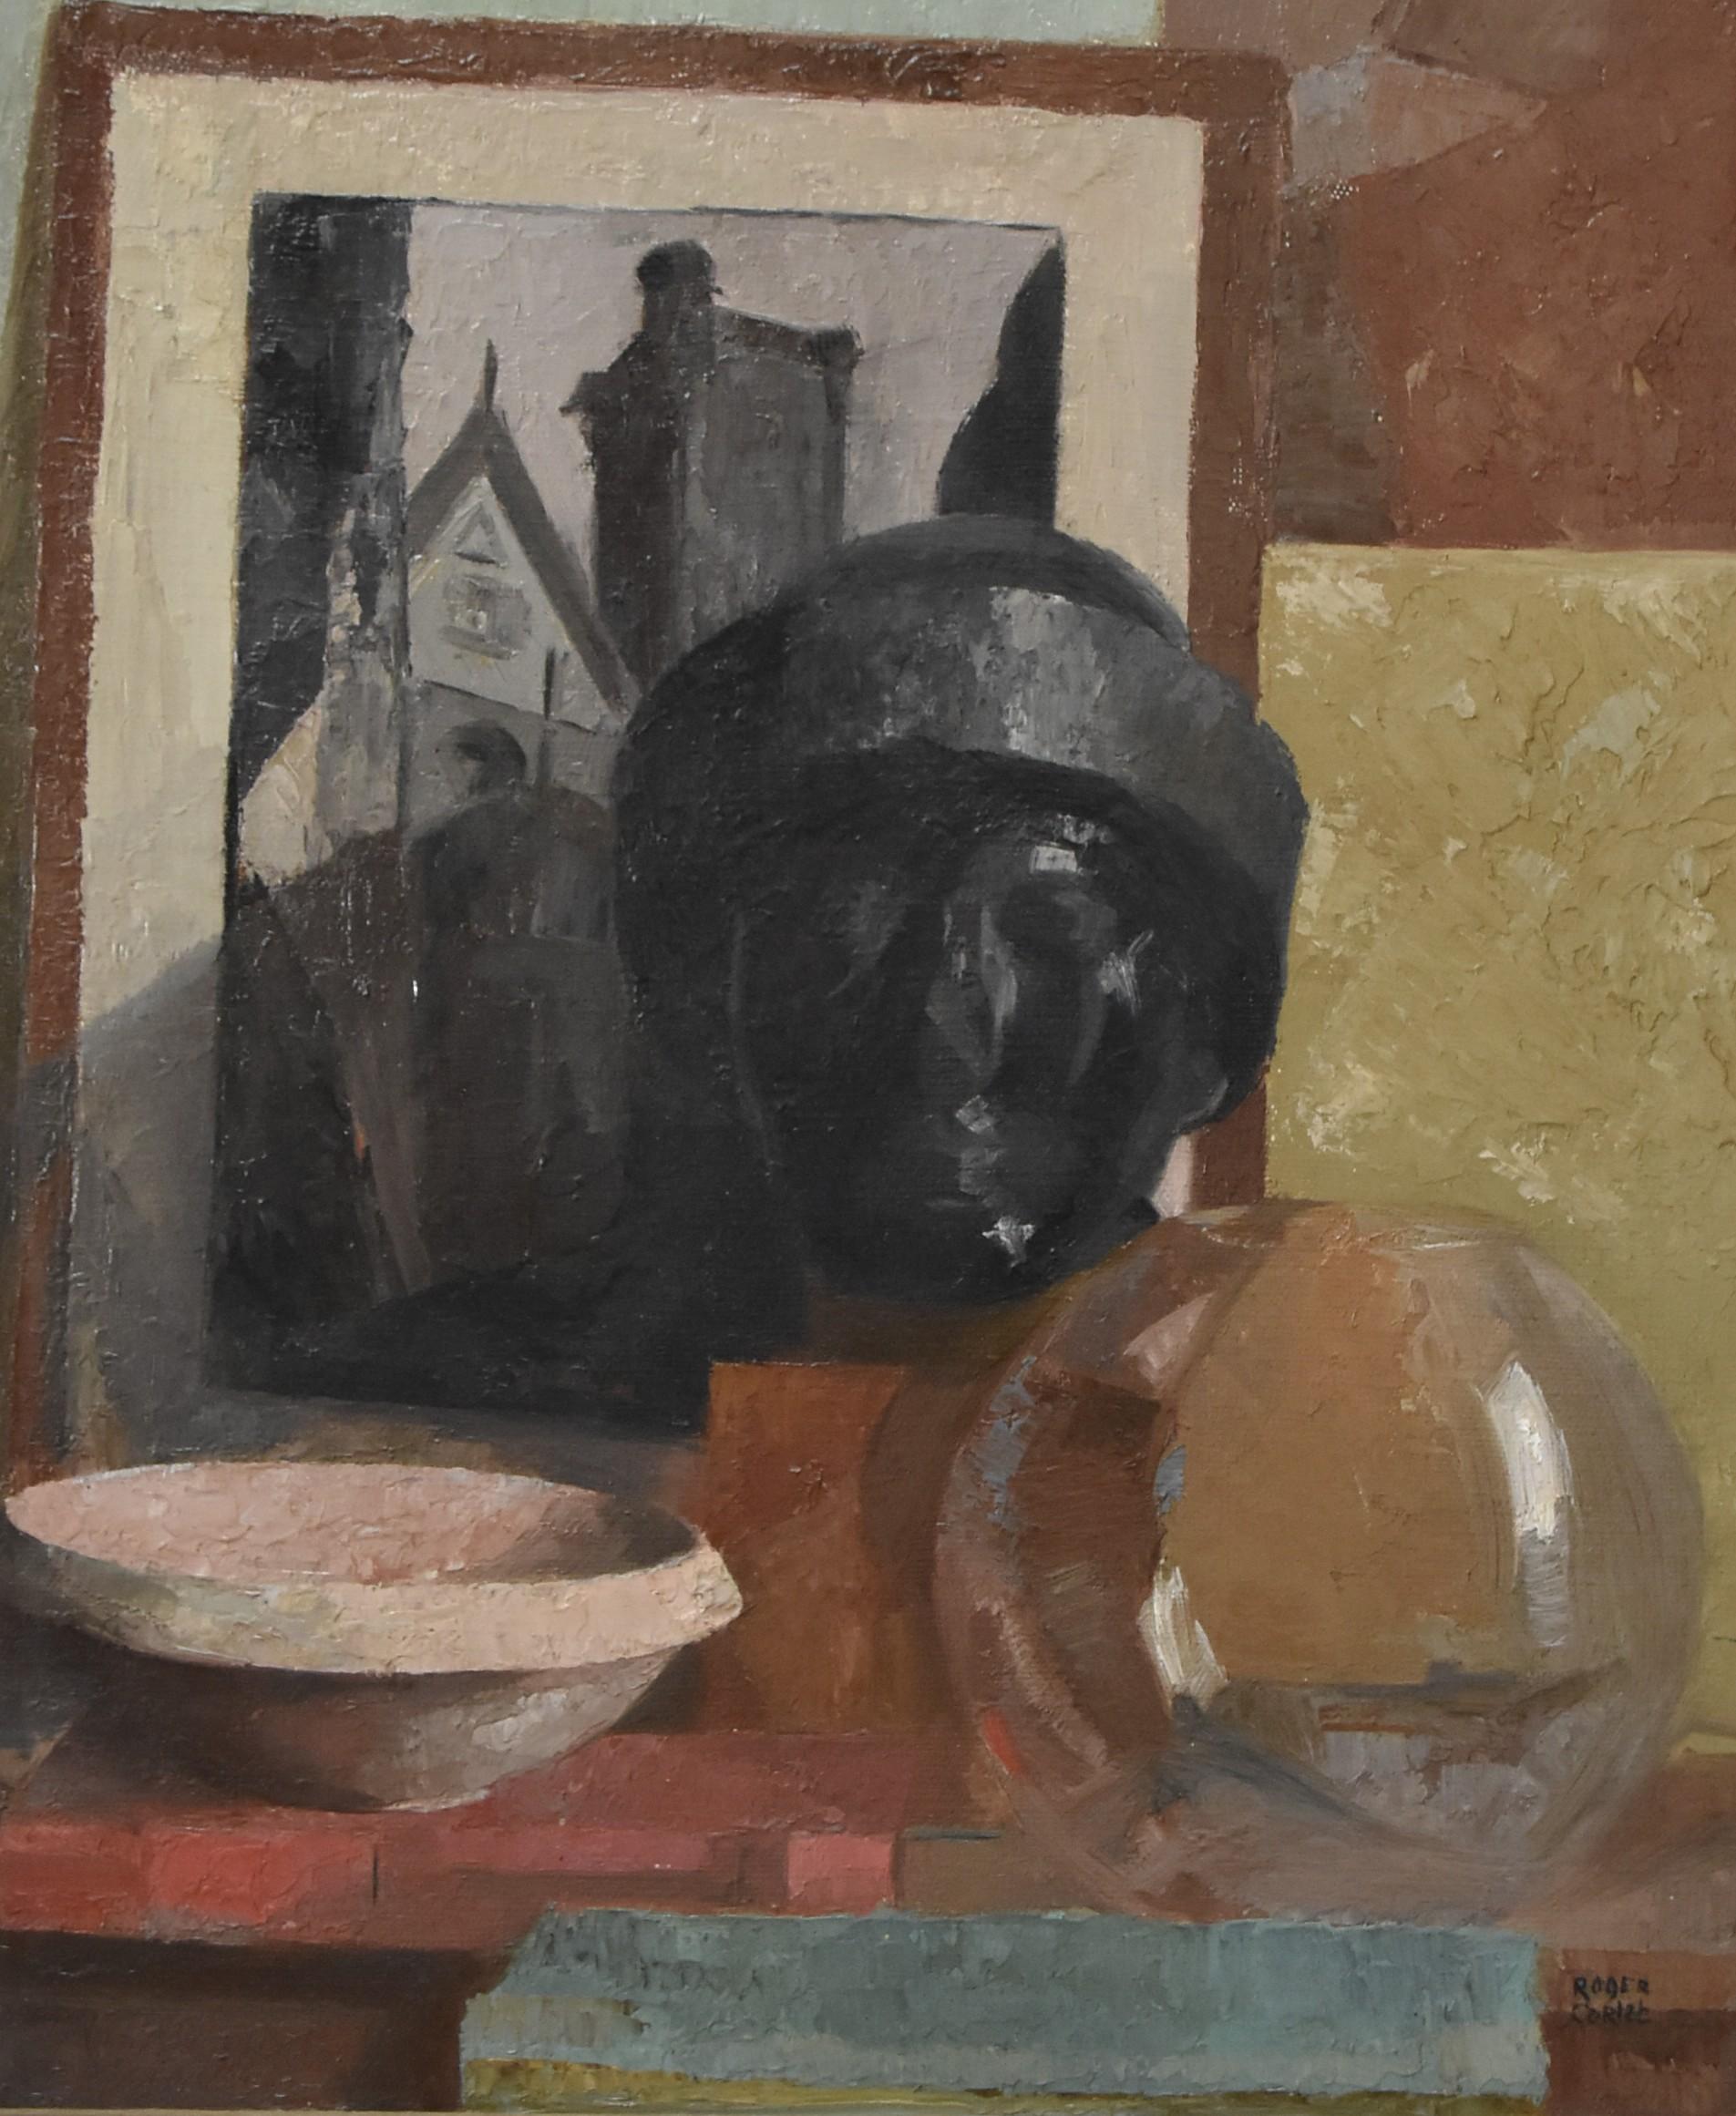 Roger Cortet (1910-1968)
A still-life with a scultpure
Oil on canvas
Signed lower right
55 x 46 cm

Roger Cortet , born in 1910 in Itxassou , in the Basque Country , and died in 1978 in Istanbul , Turkey, was most known to have been a renowned a